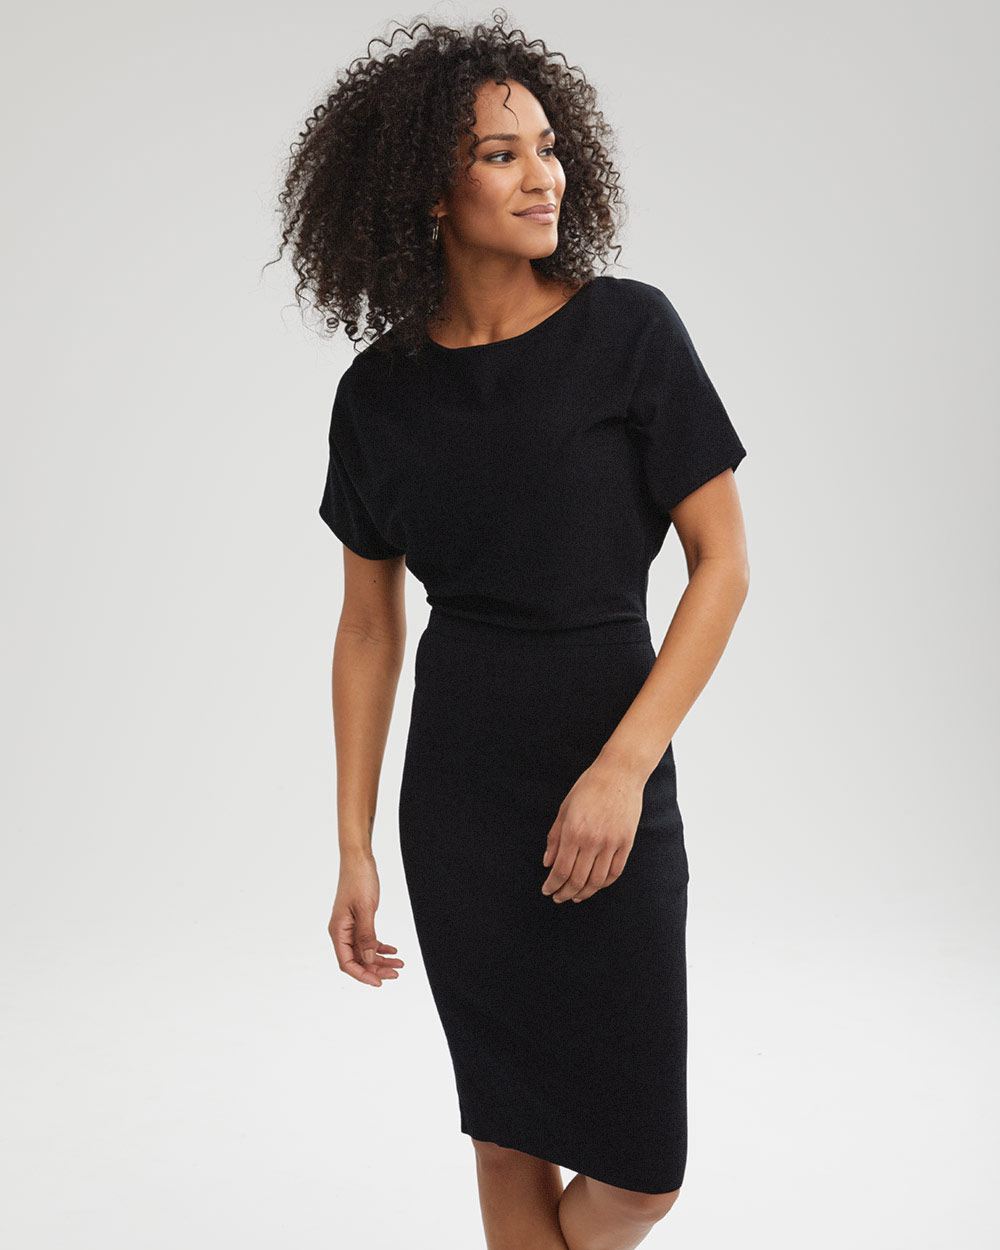 Fitted Boat Neck Dress | RW&CO.